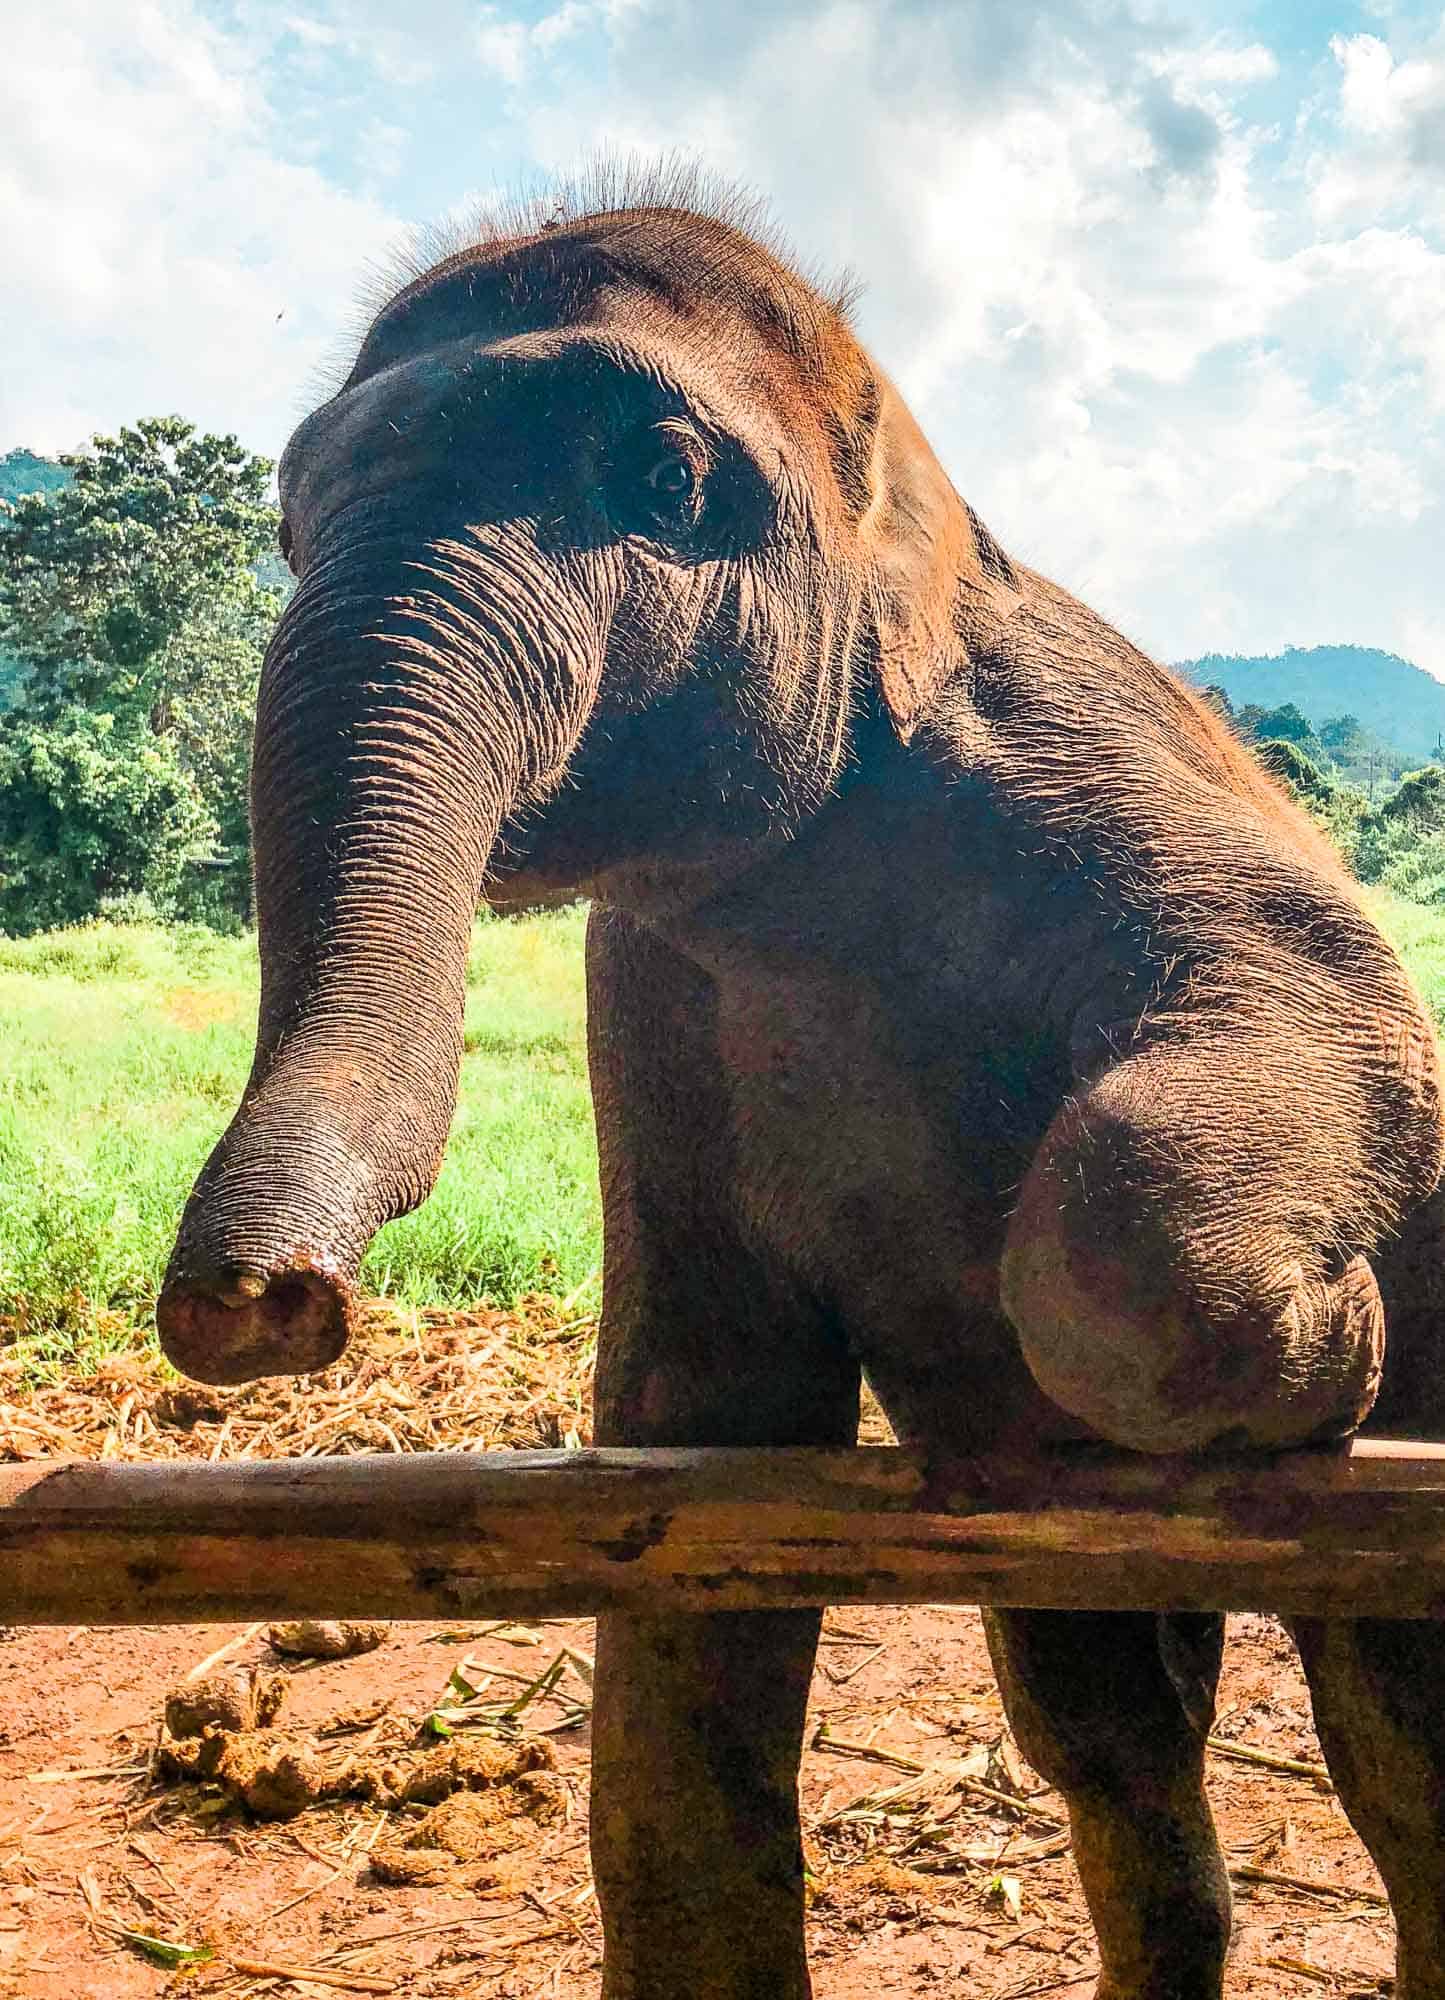 An elephant at Elephant Nature Park sanctuary in Chiang Mai